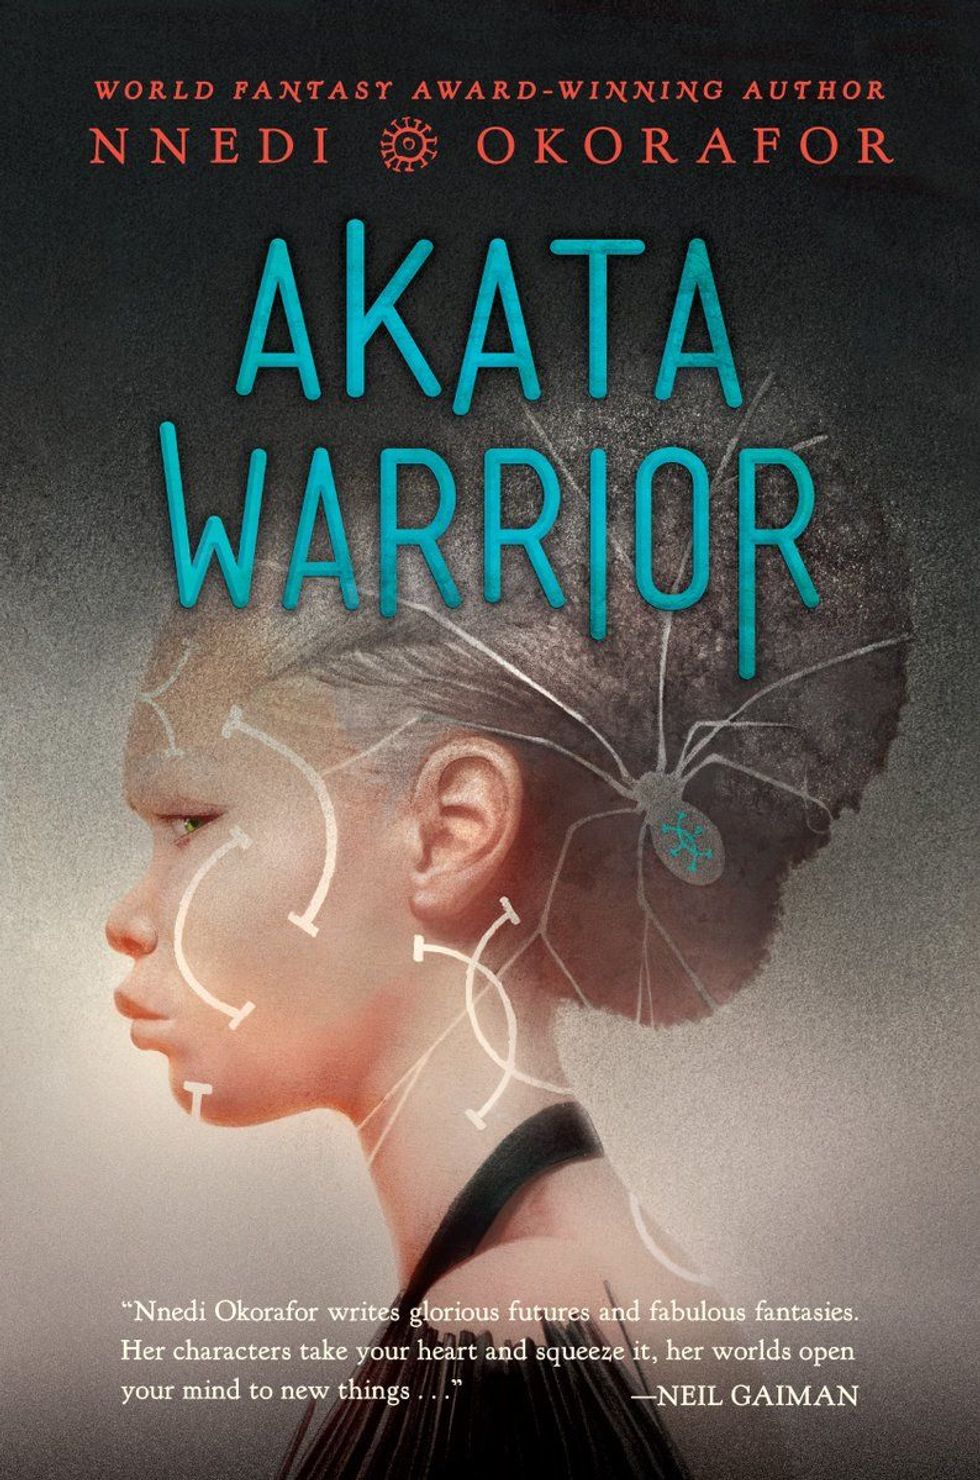 Nnedi Okorafor's New Novel 'Akata Warrior' Just Released Today—And a Third Is In the Works